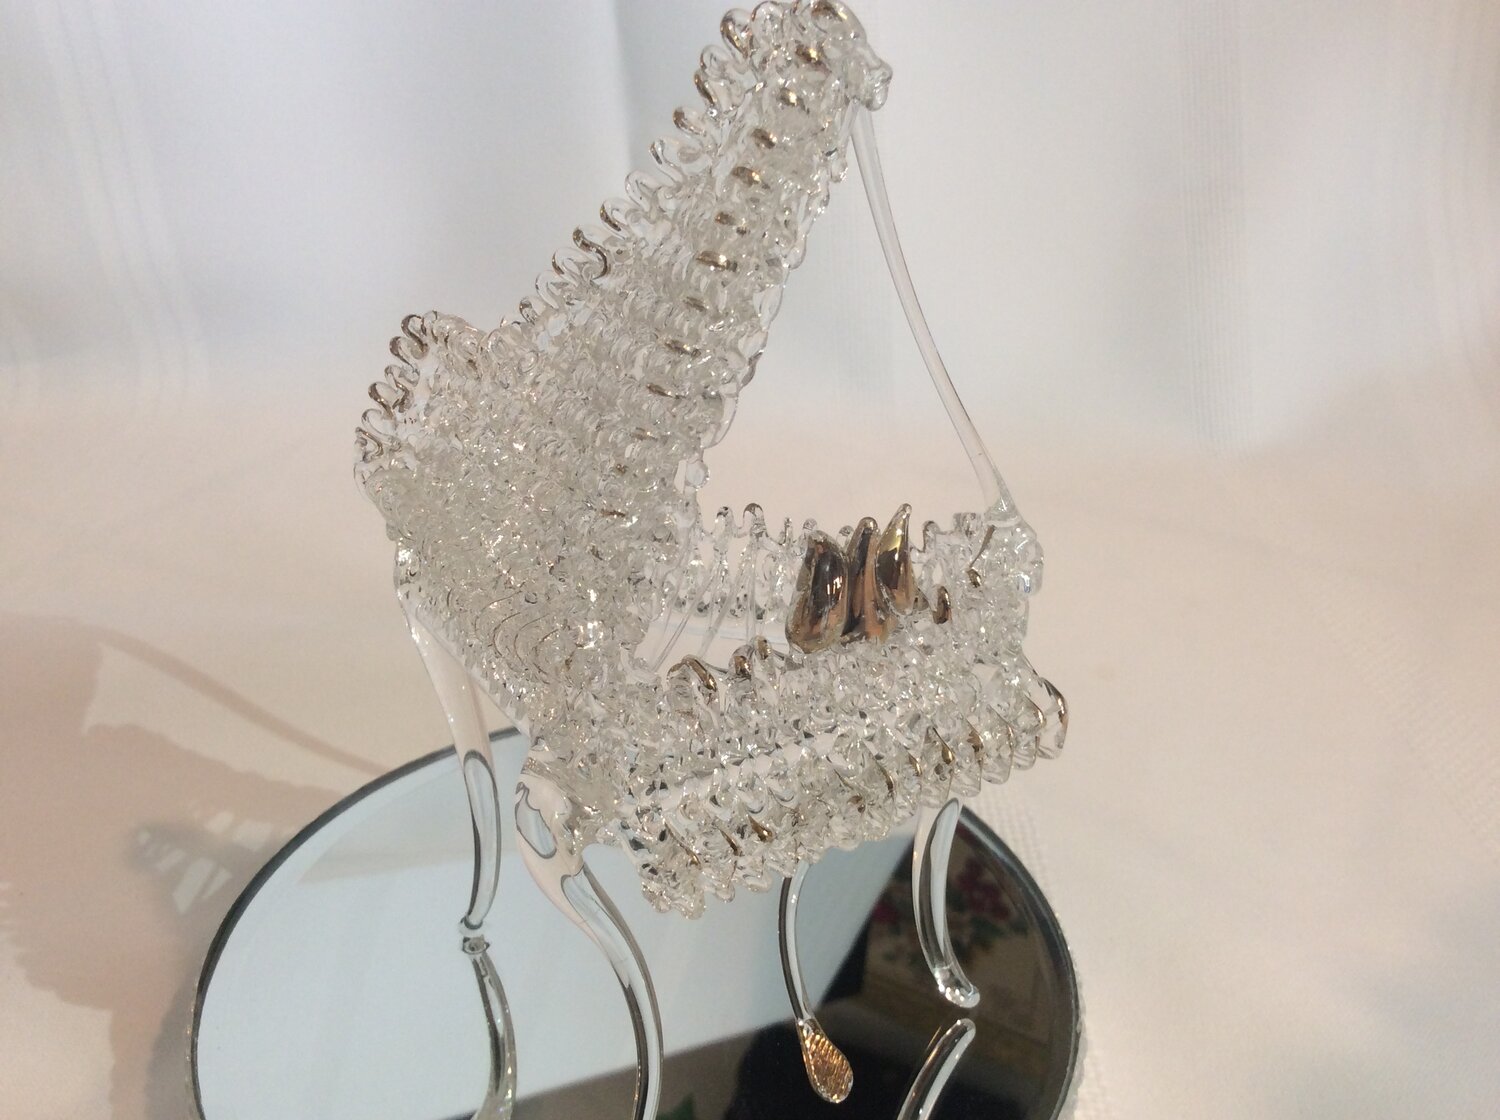 Miniature Hand-Blown Glass Piano Figurine with Round Embellished 